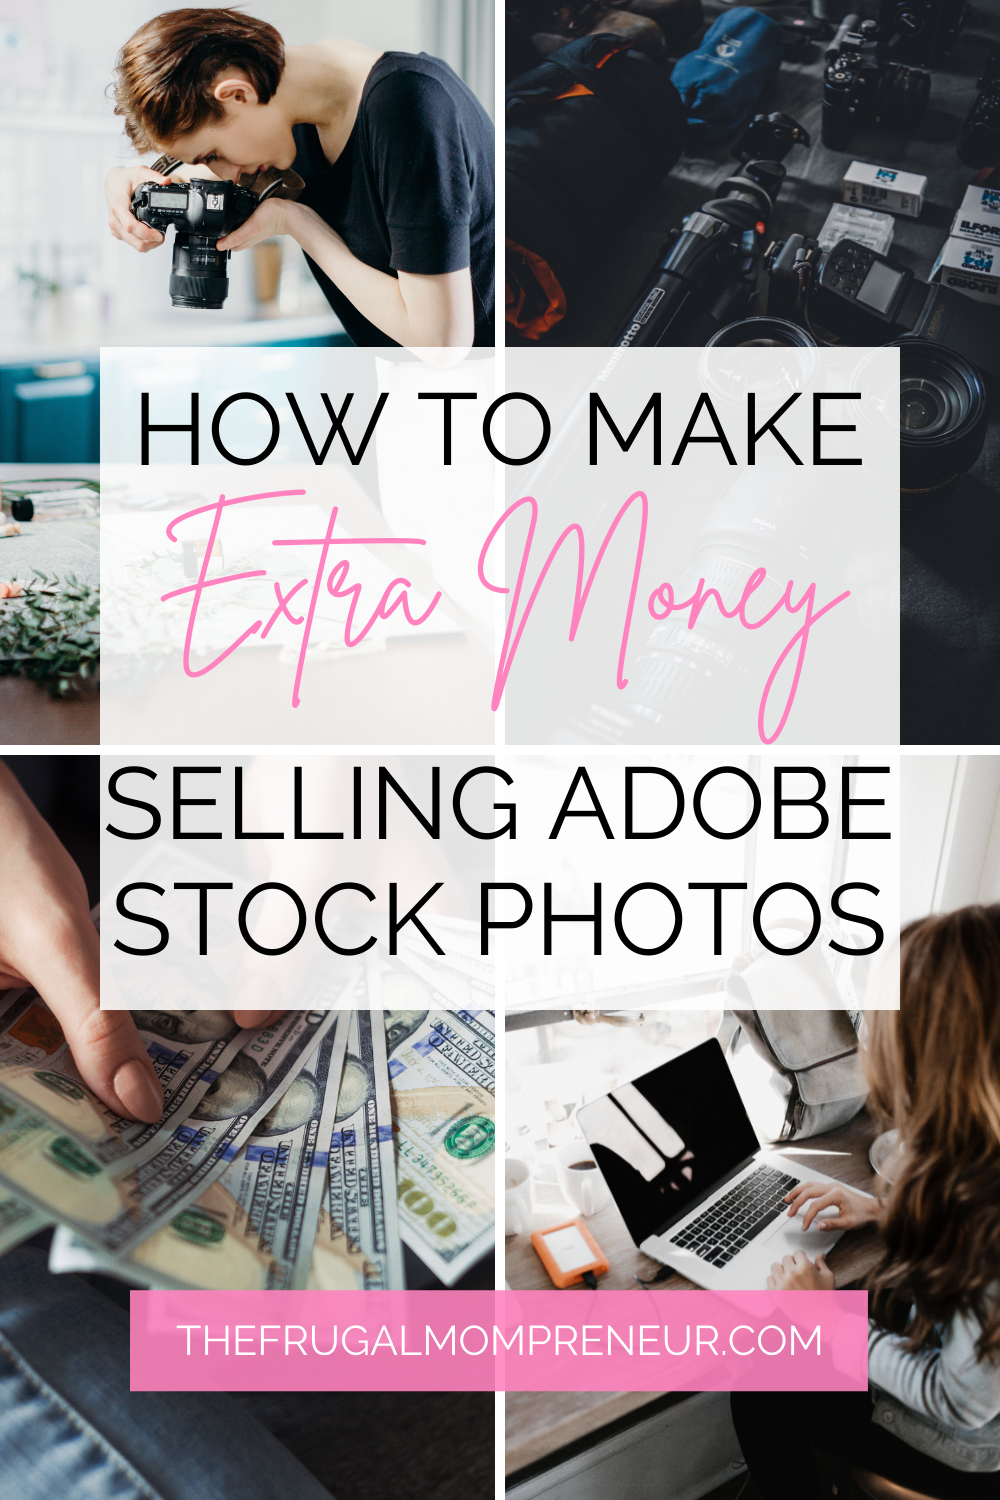 How to make money selling stock photos?